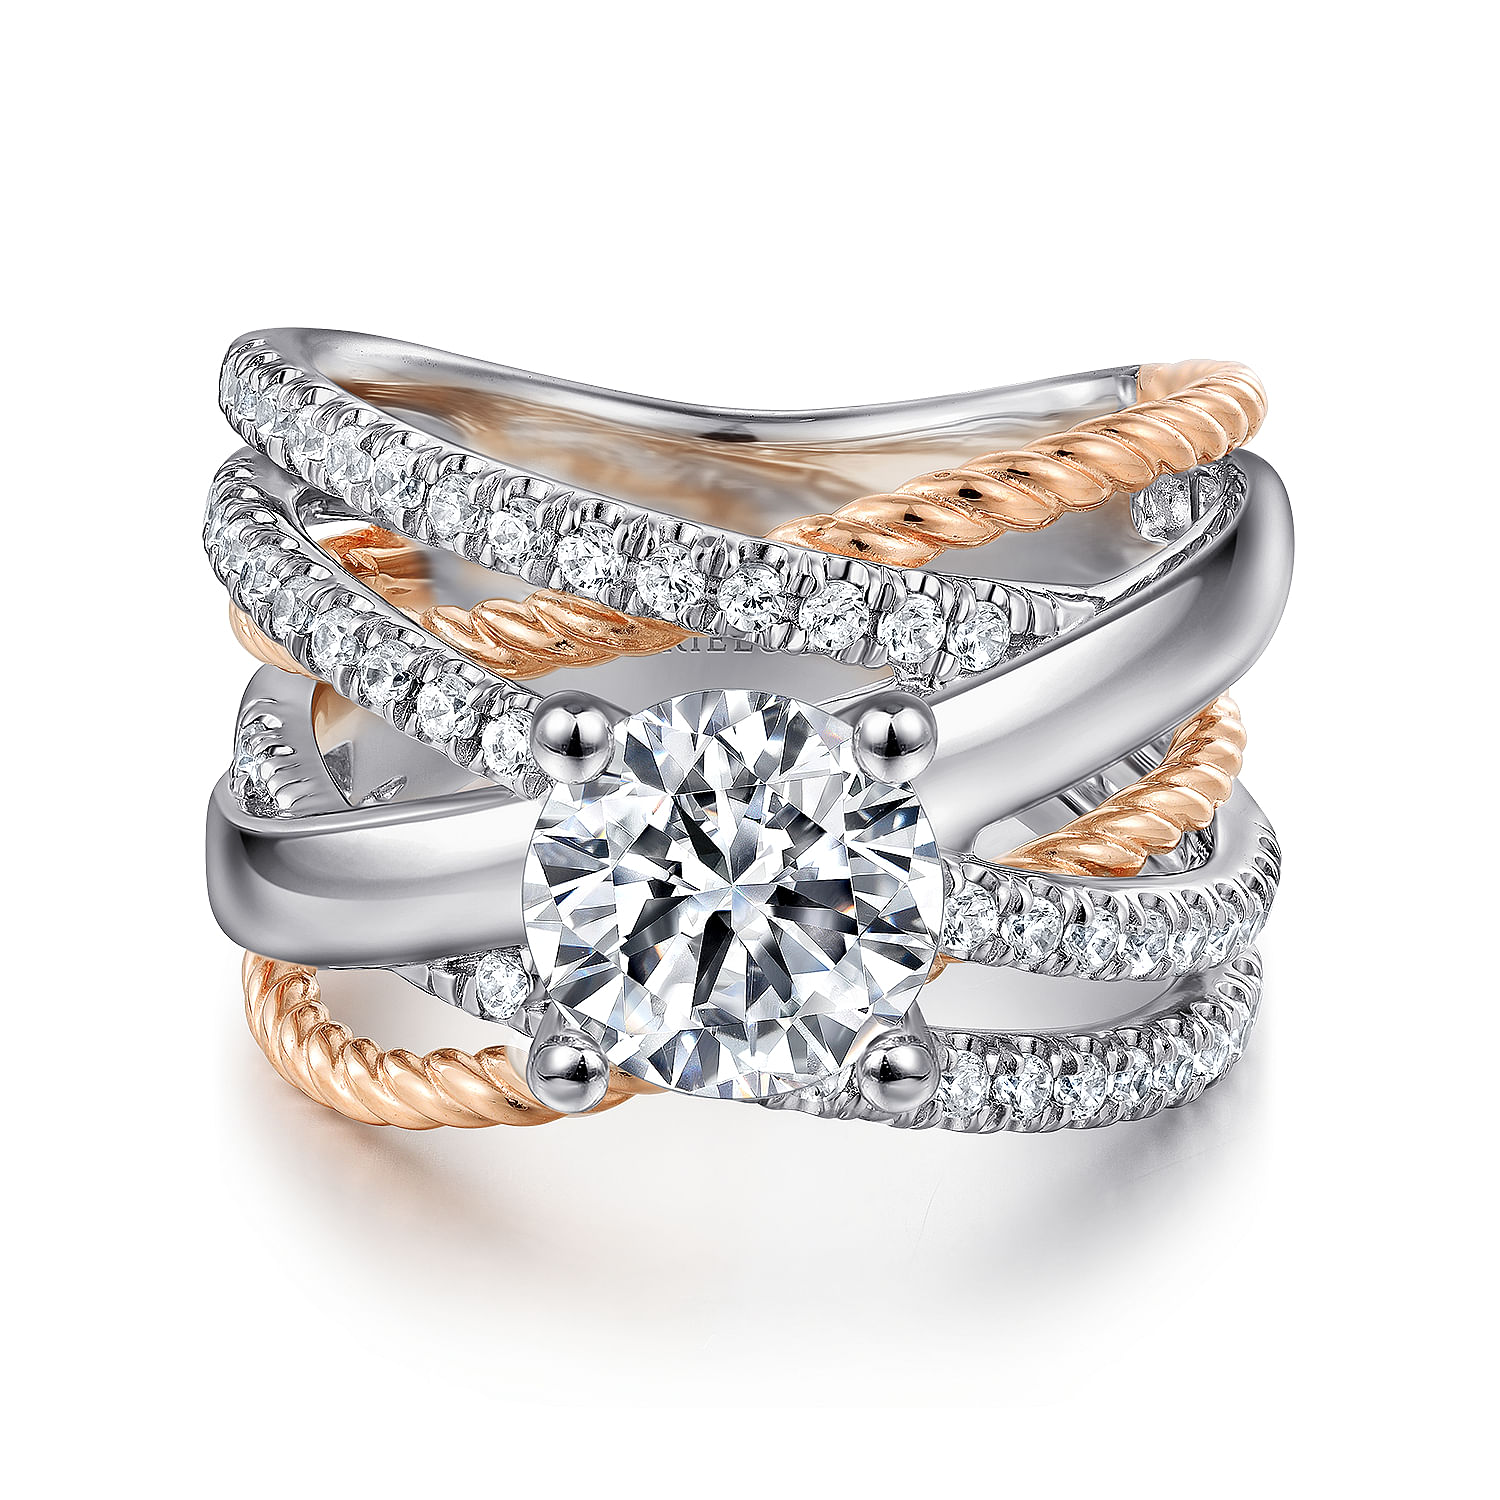 Affection - 14K White-Rose Gold Free Form Round Diamond Engagement Ring